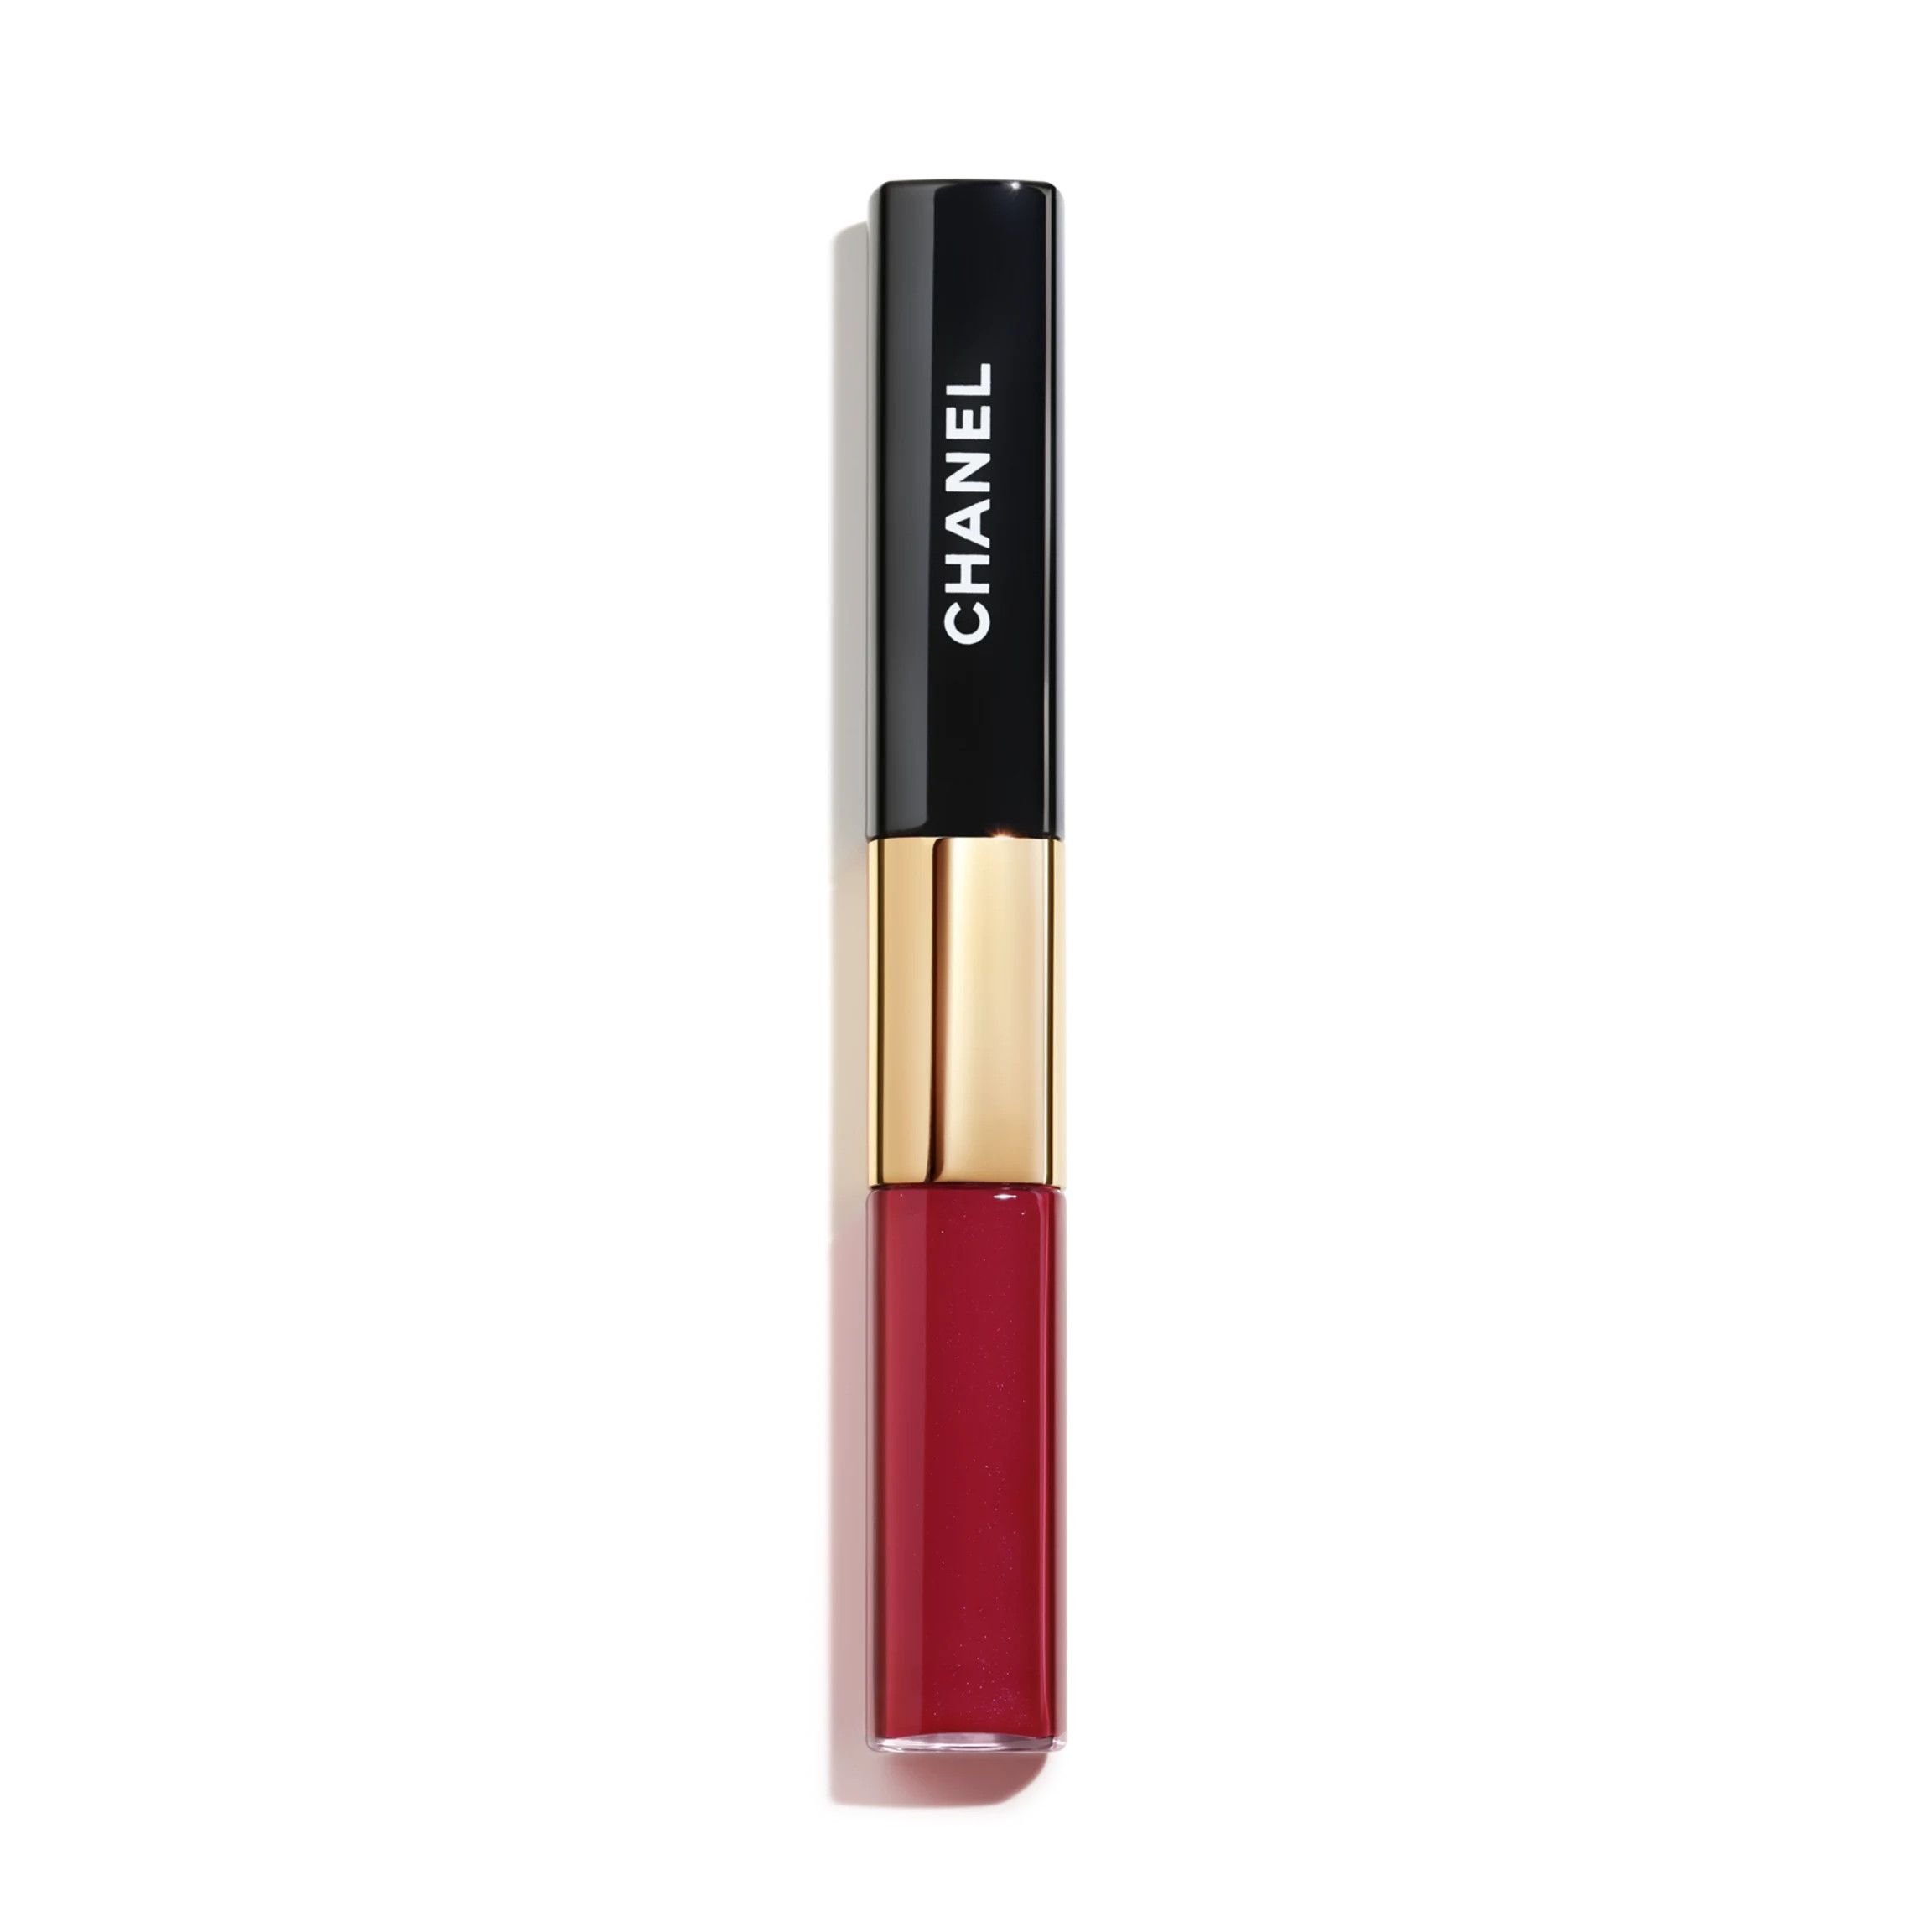 Chanel Duo In Shade 47 - DARING RED | Chanel, Inc. (US)